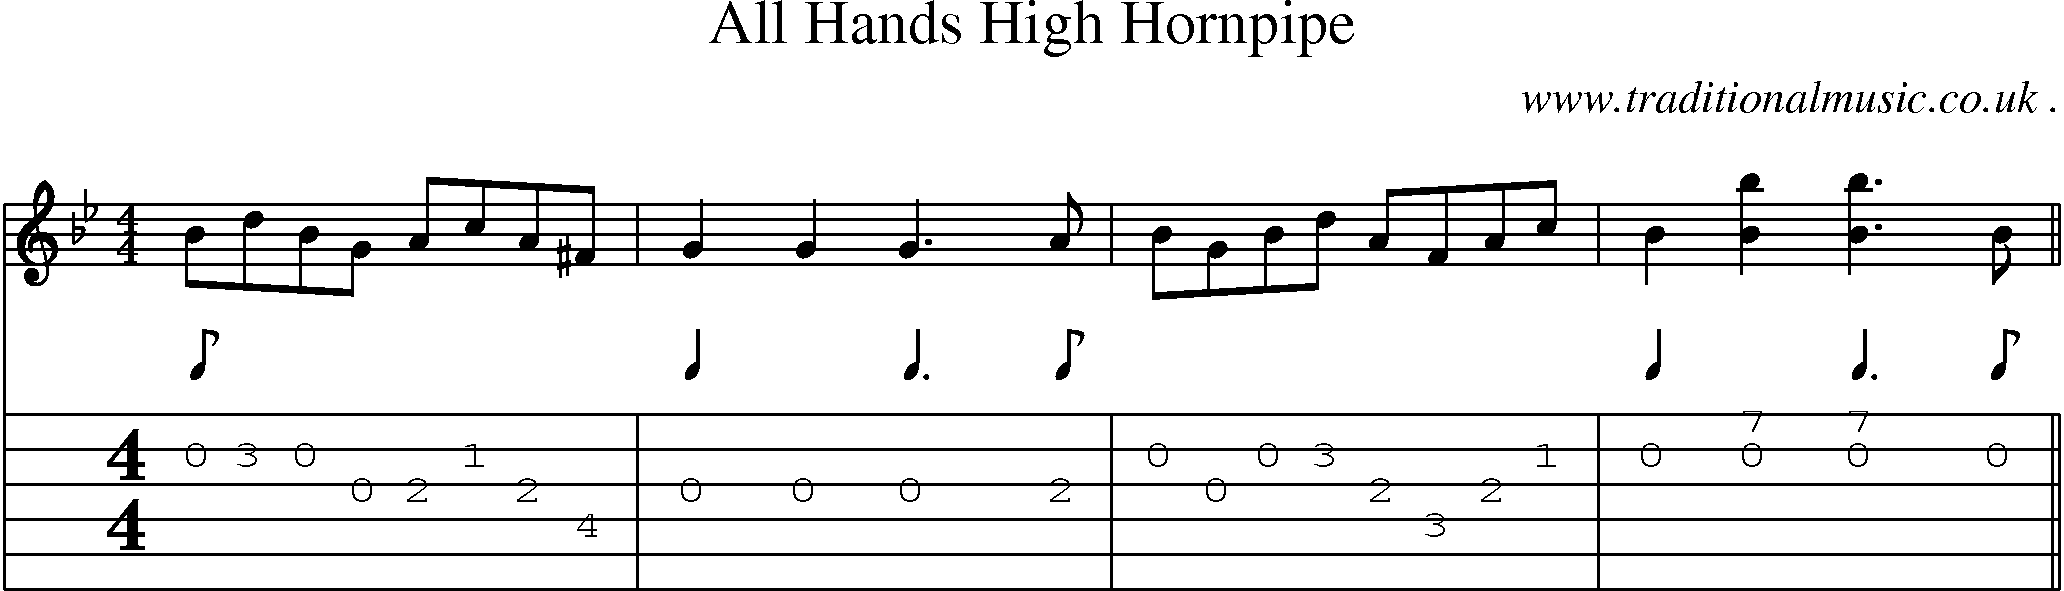 Sheet-Music and Guitar Tabs for All Hands High Hornpipe